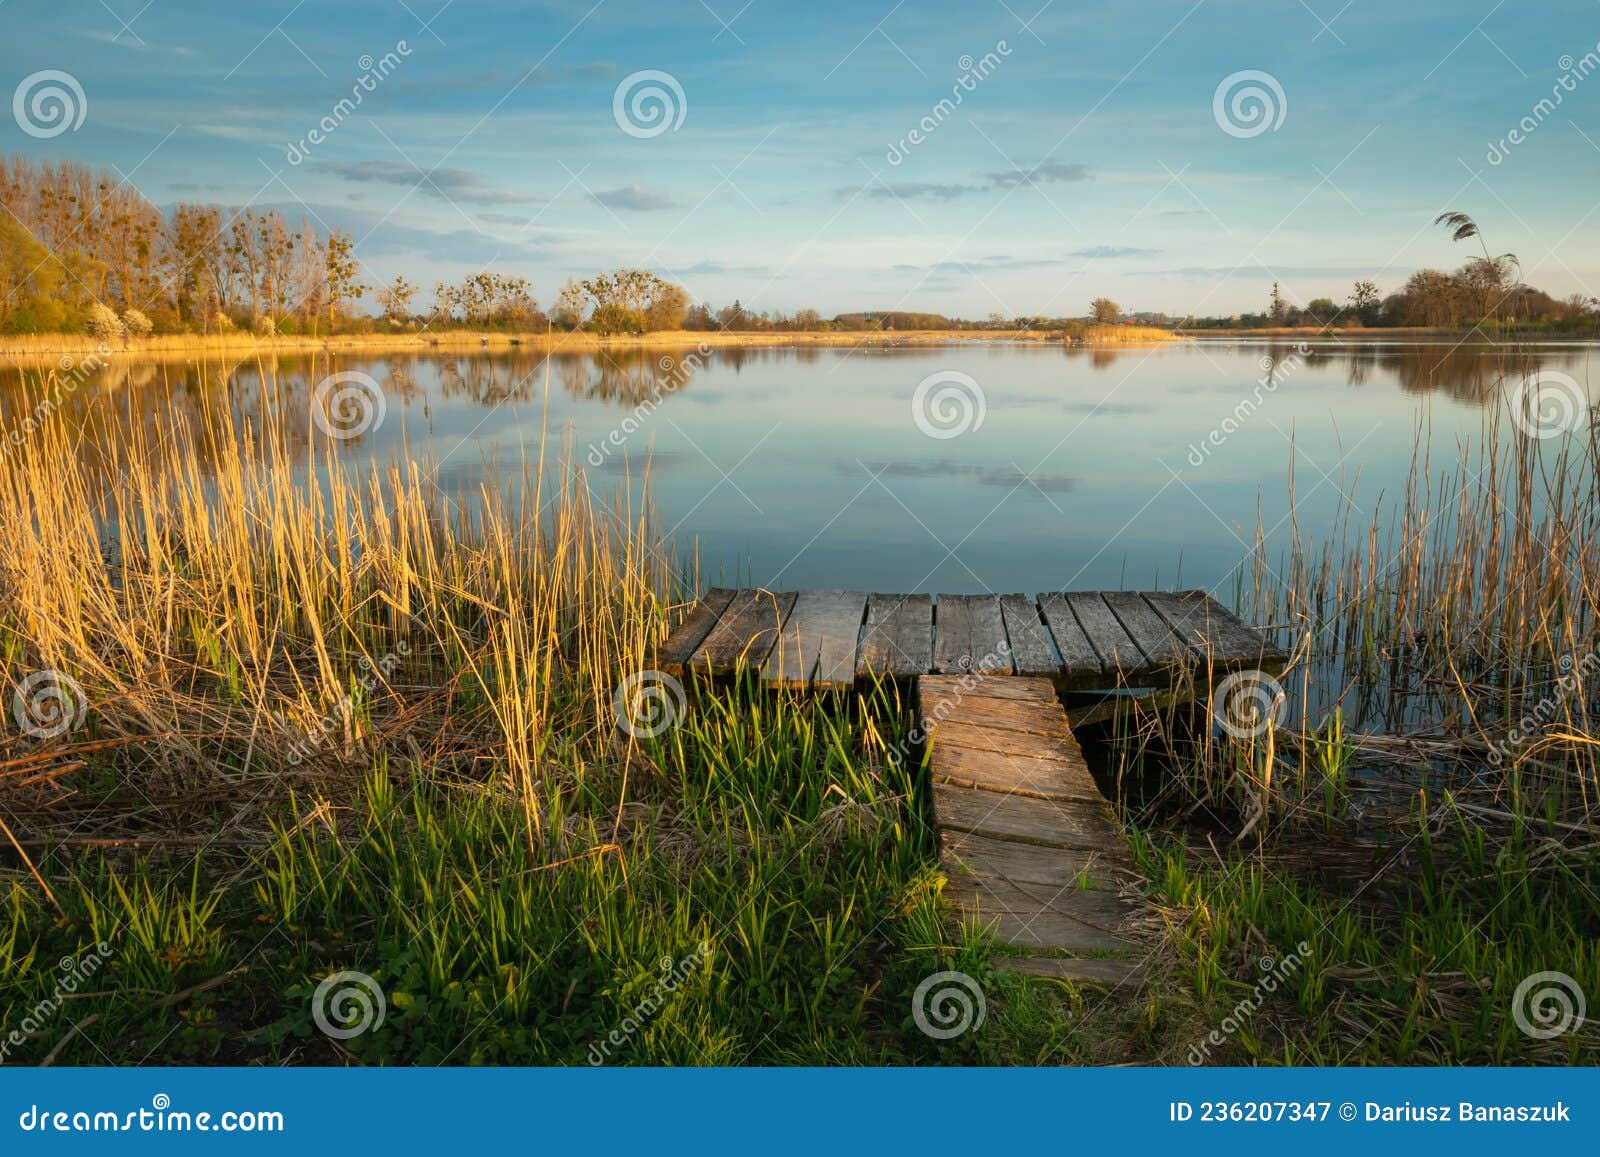 Wooden Fishing Platform in the Reeds of the Lake Stock Image - Image of  cloud, cane: 236207347